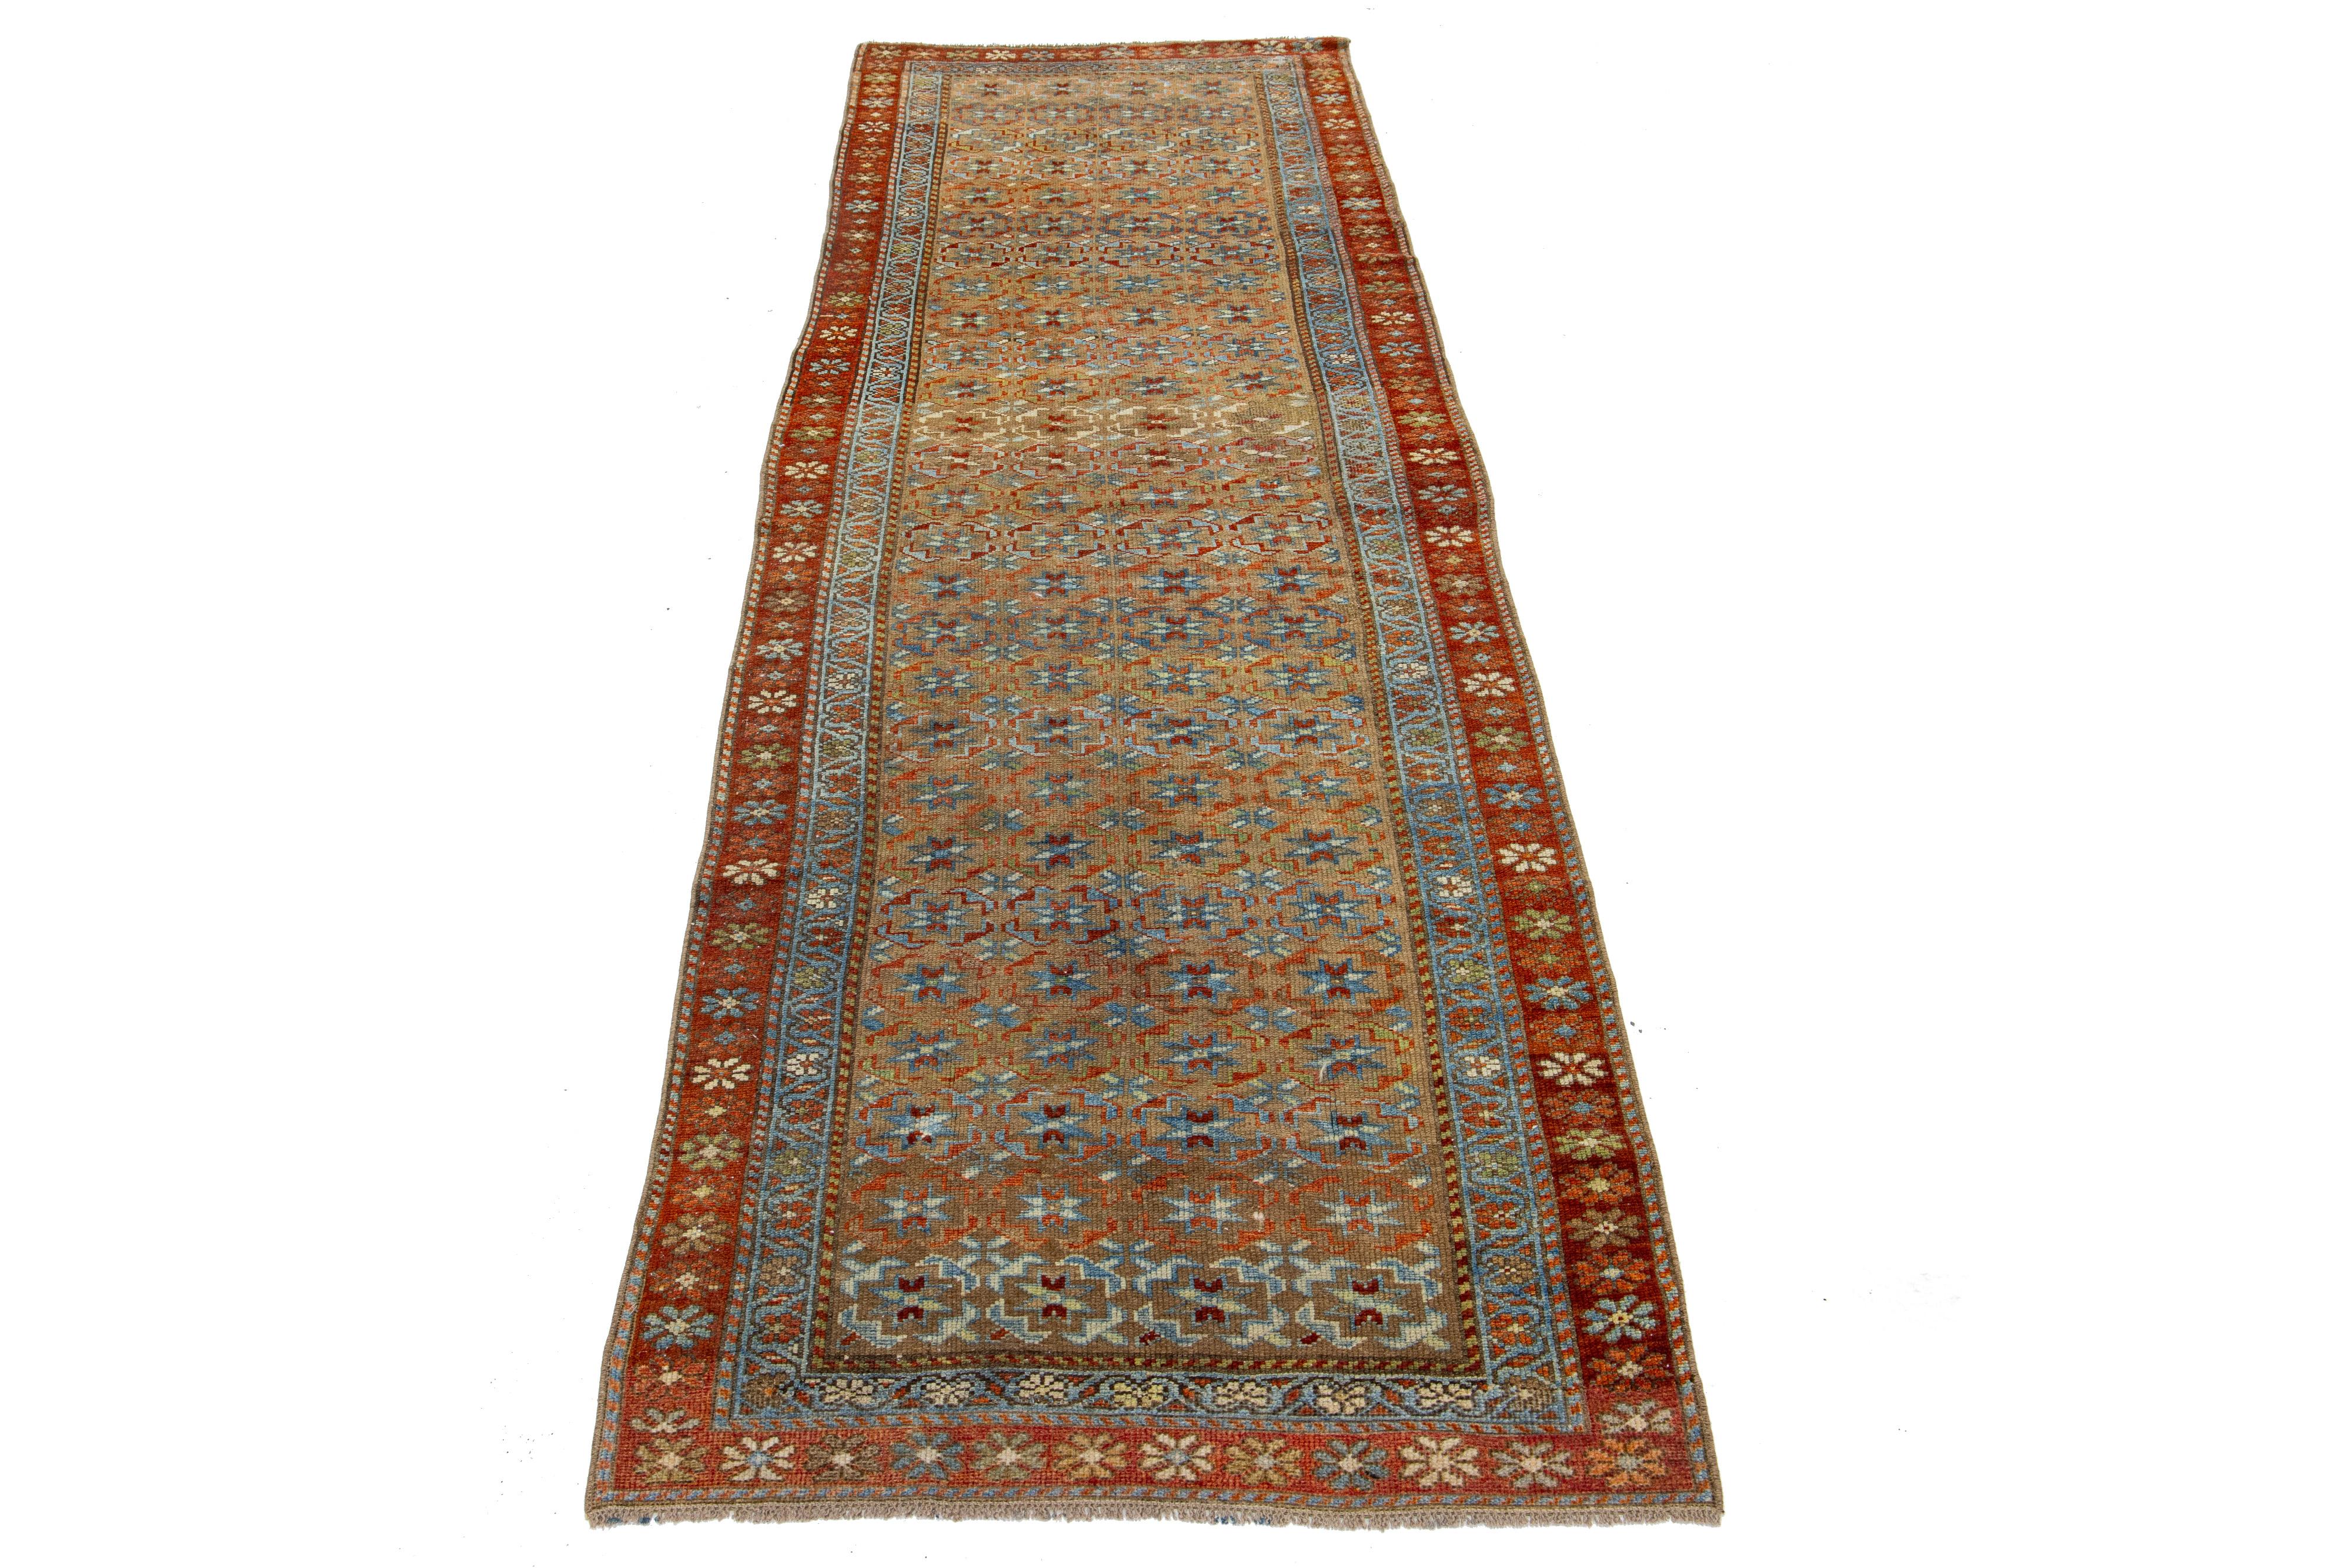 Beautiful antique Bidjar hand-knotted wool runner with a brown color field. This Bidjar rug has a designed frame with beige, rust, and blue accents in a gorgeous all-over design.

This rug measures 2'11